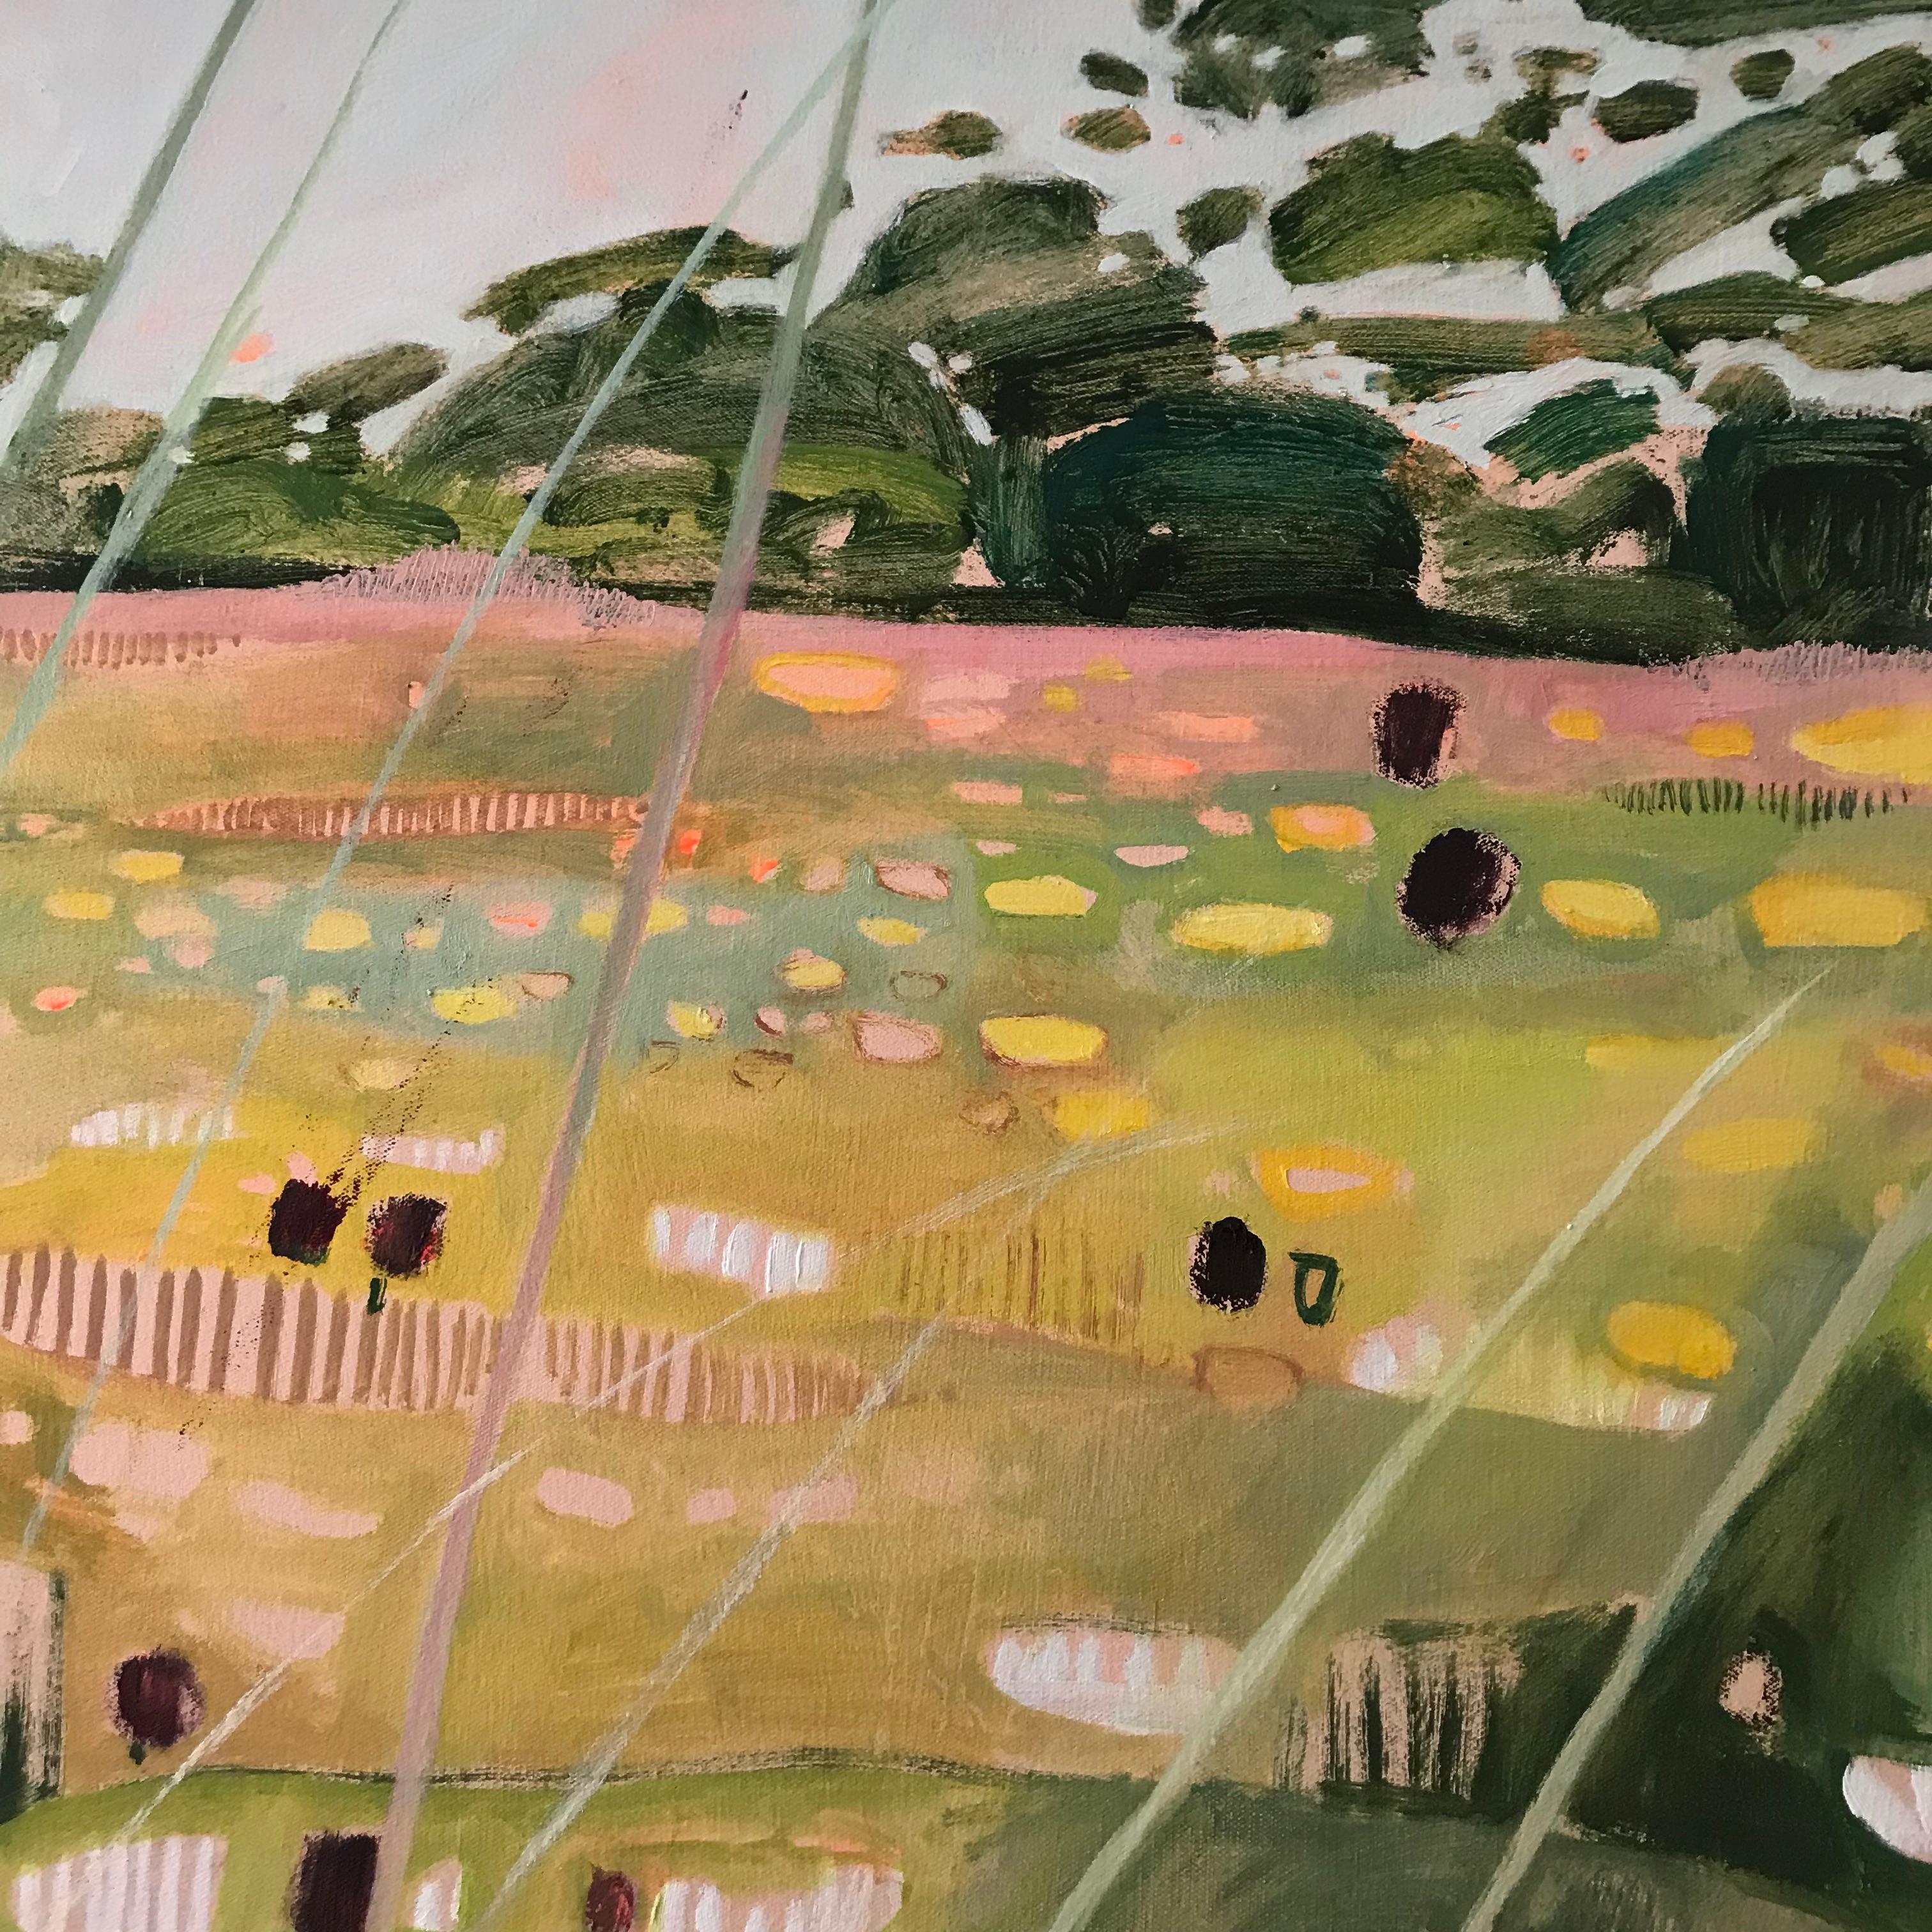 This work, painted in delicate summery pastel shades depicts a traditional wildflower meadow putting on its full summer show. Here are the colours of soft green grasses and the pretty pinks and yellows of the native wild flowers in this meadow.